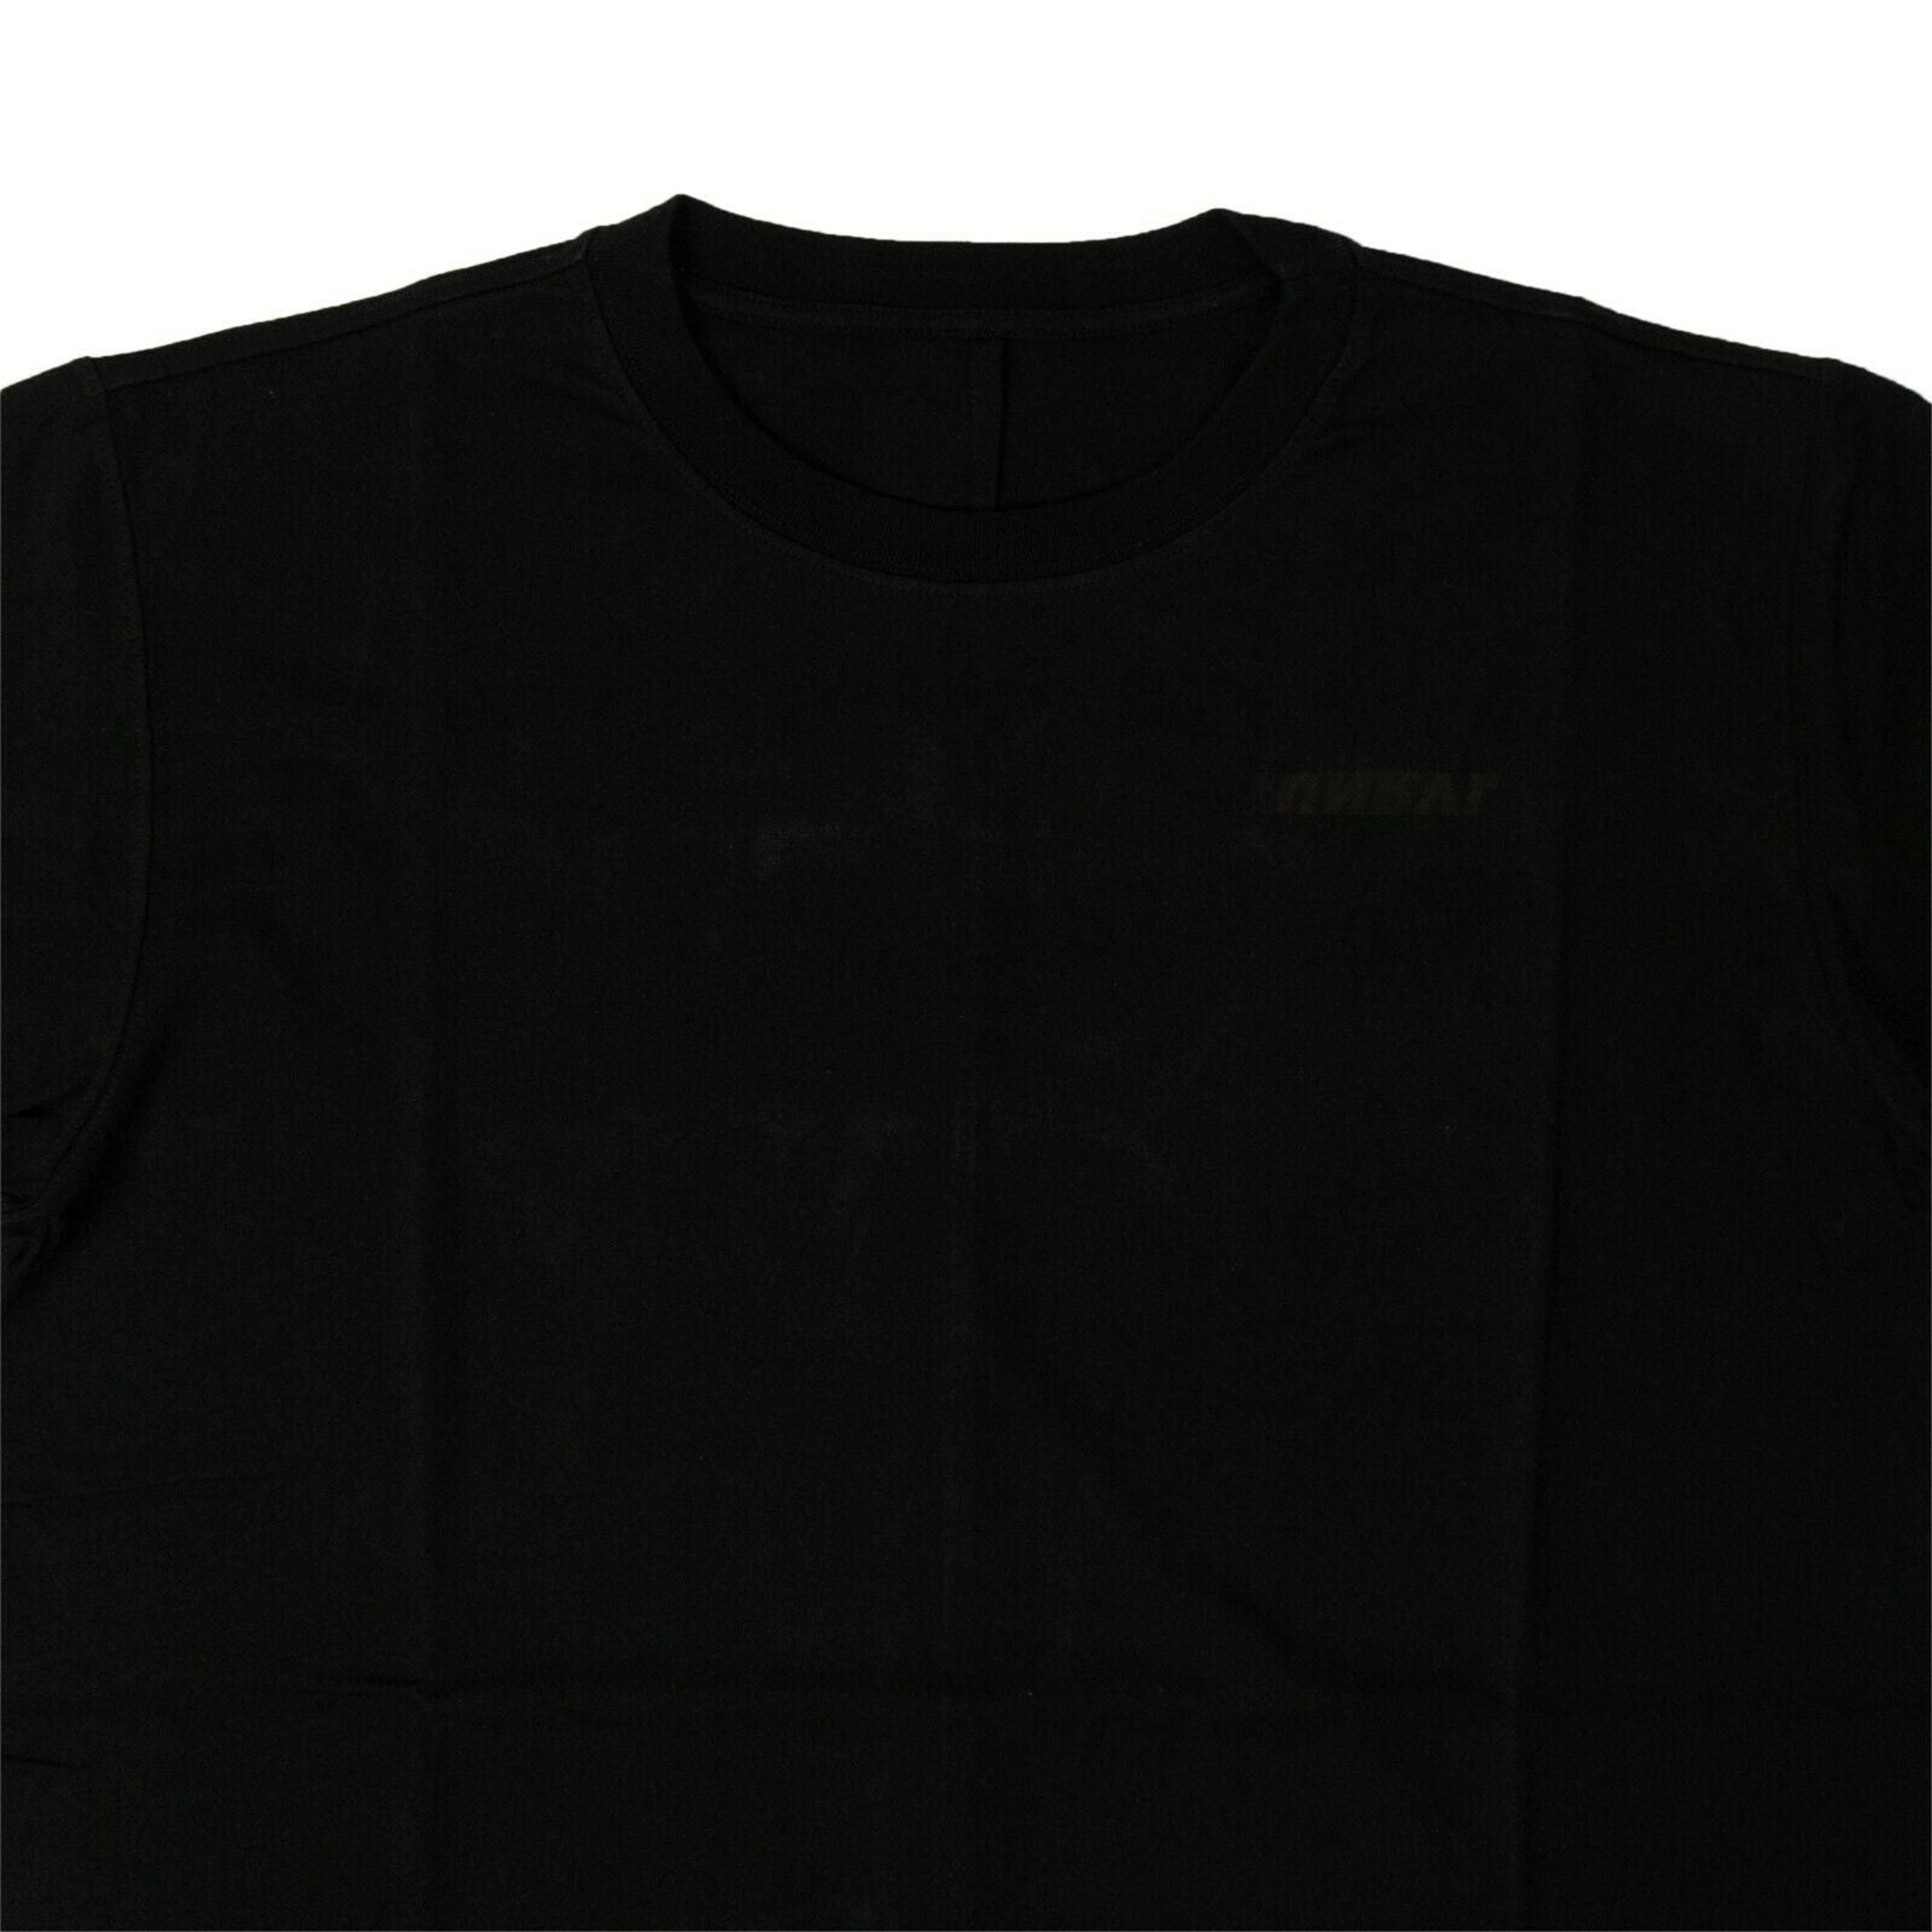 Alternate View 2 of Black Relaxed Fit T-Shirt